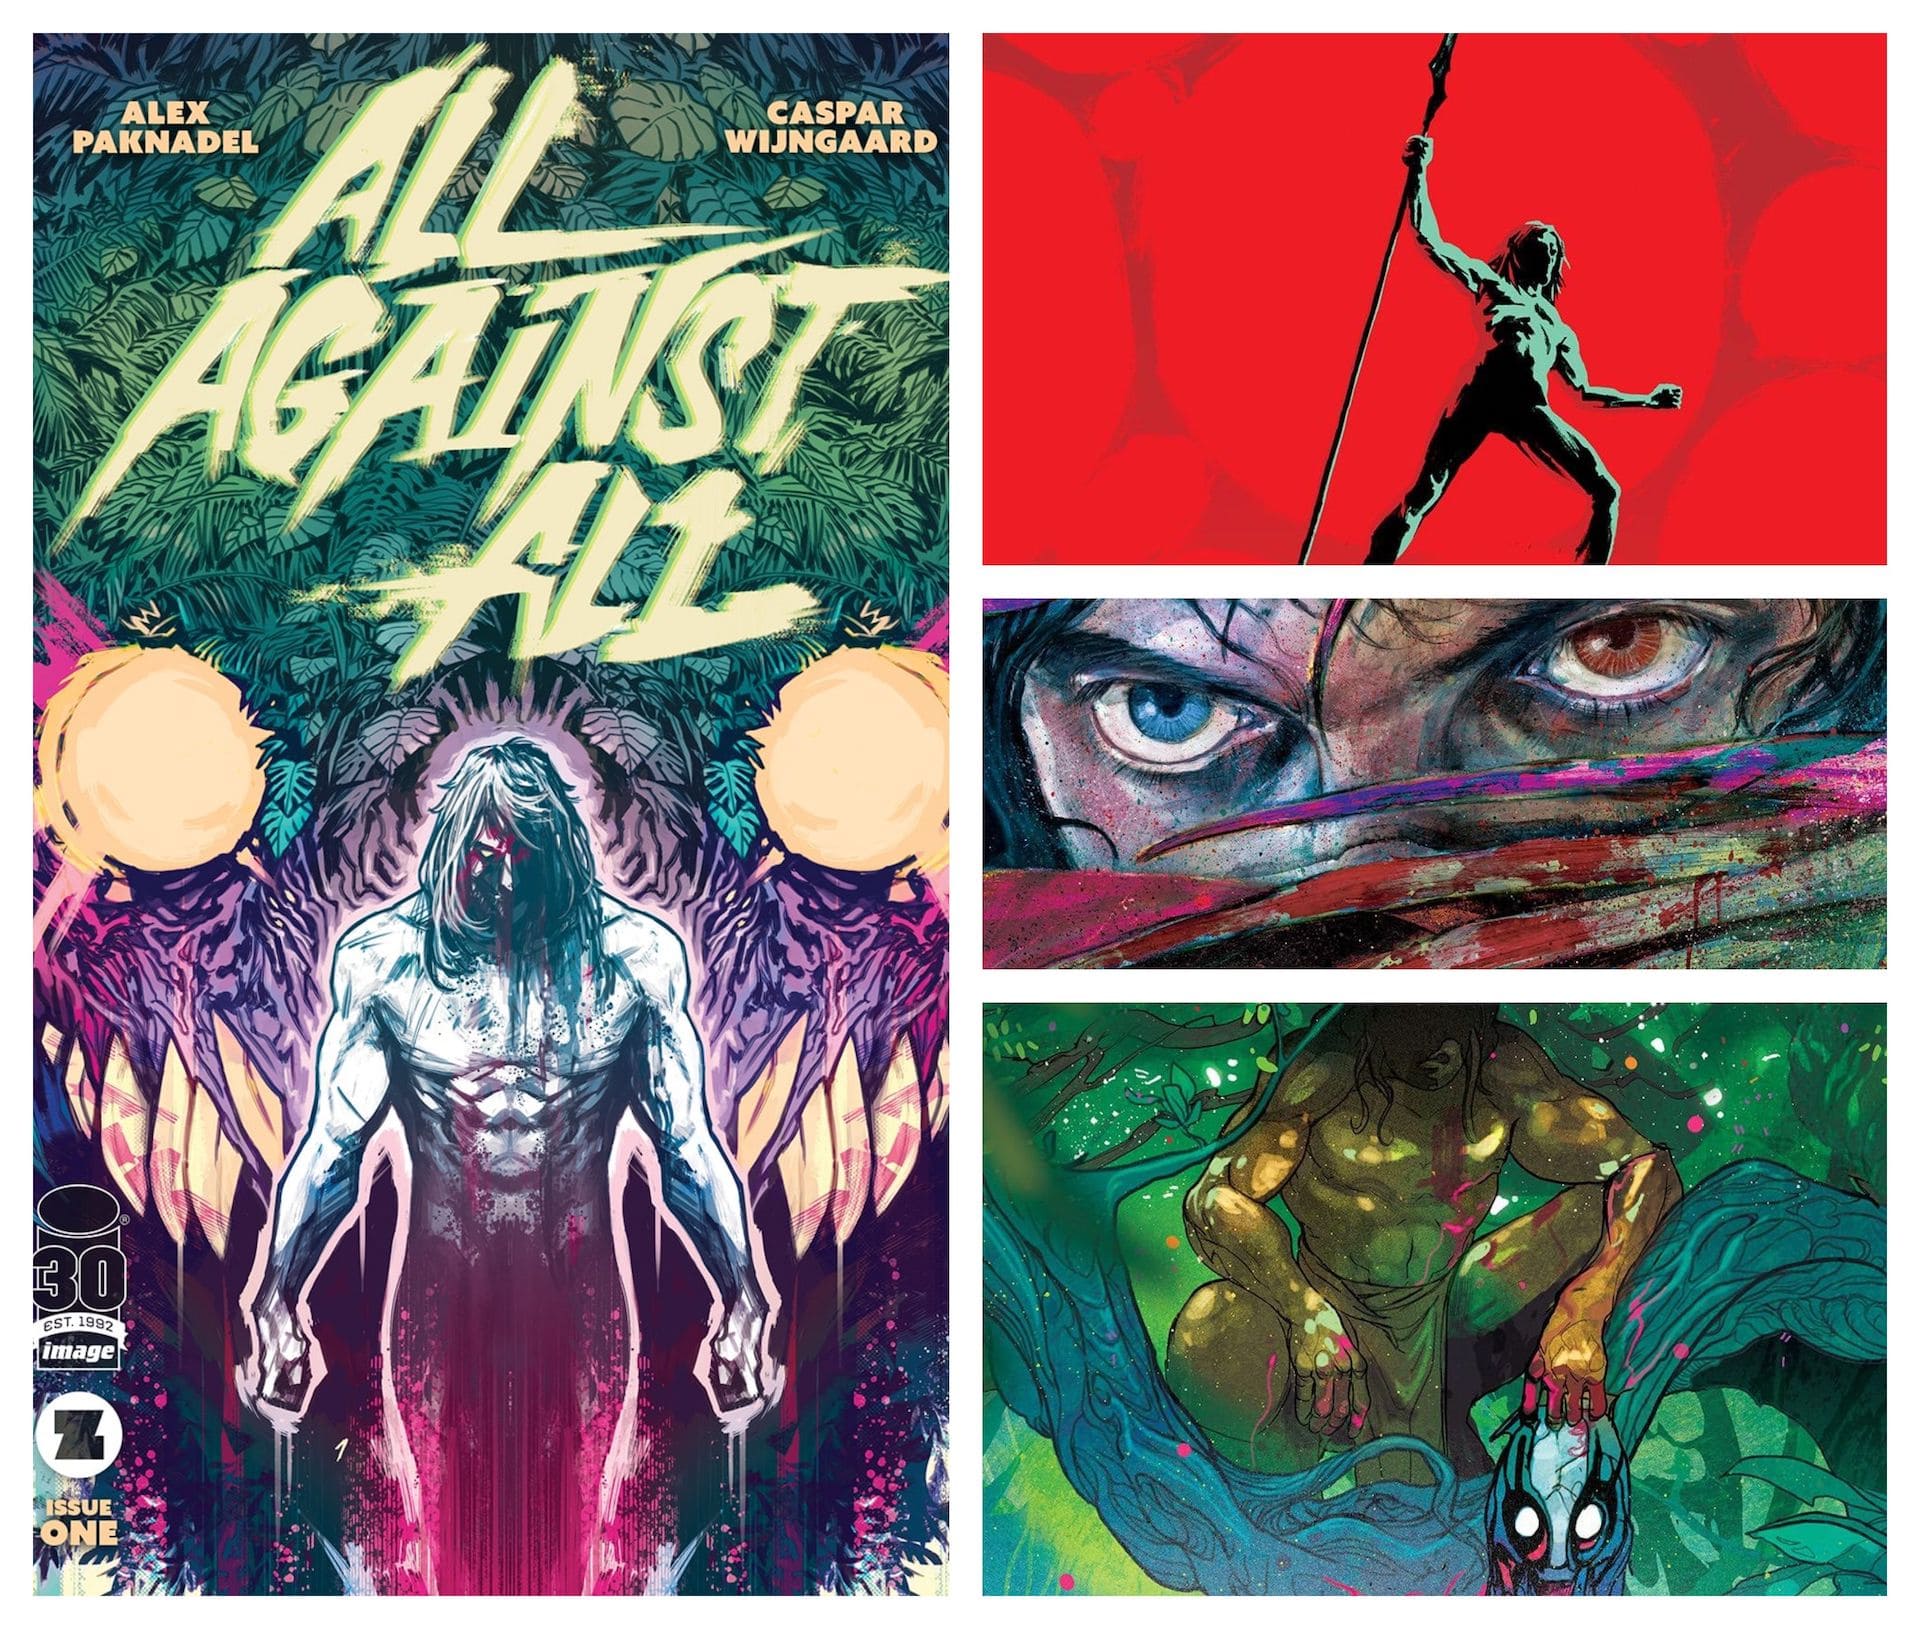 Brutal sci-fi series 'All Against All' #1 launching from Image/Syzygy December 7 (Exclusive)